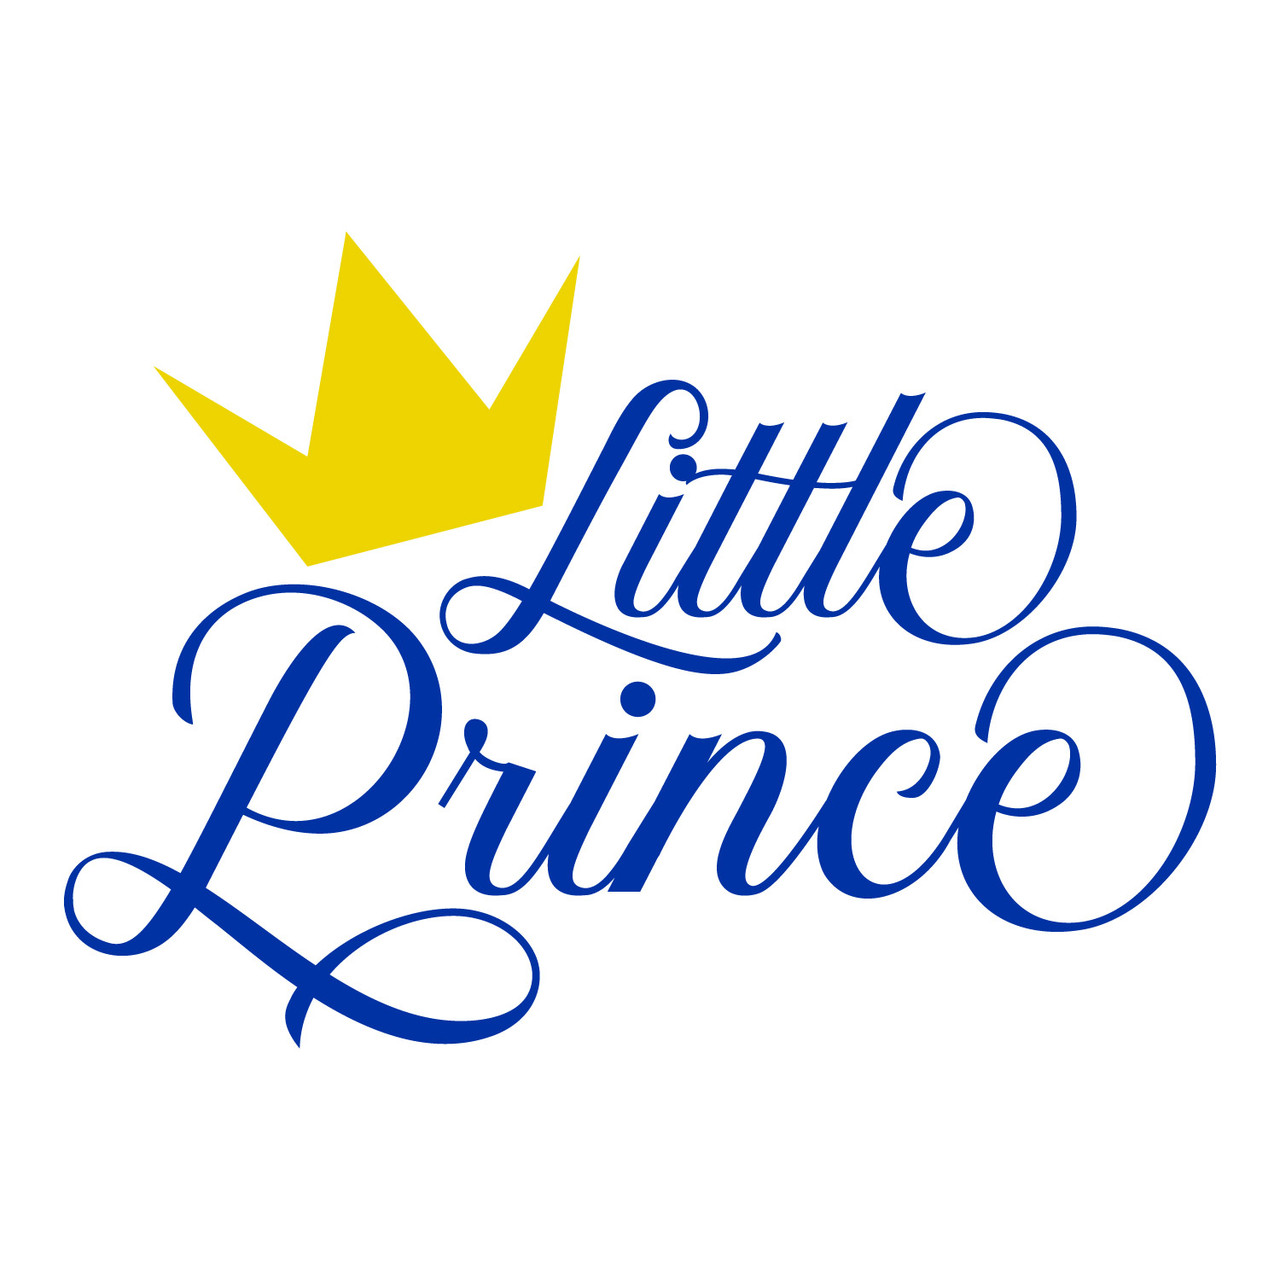 Little Prince Svg Svg Eps Png Dxf Cut Files For Cricut And Silhouette Cameo By Savanasdesign